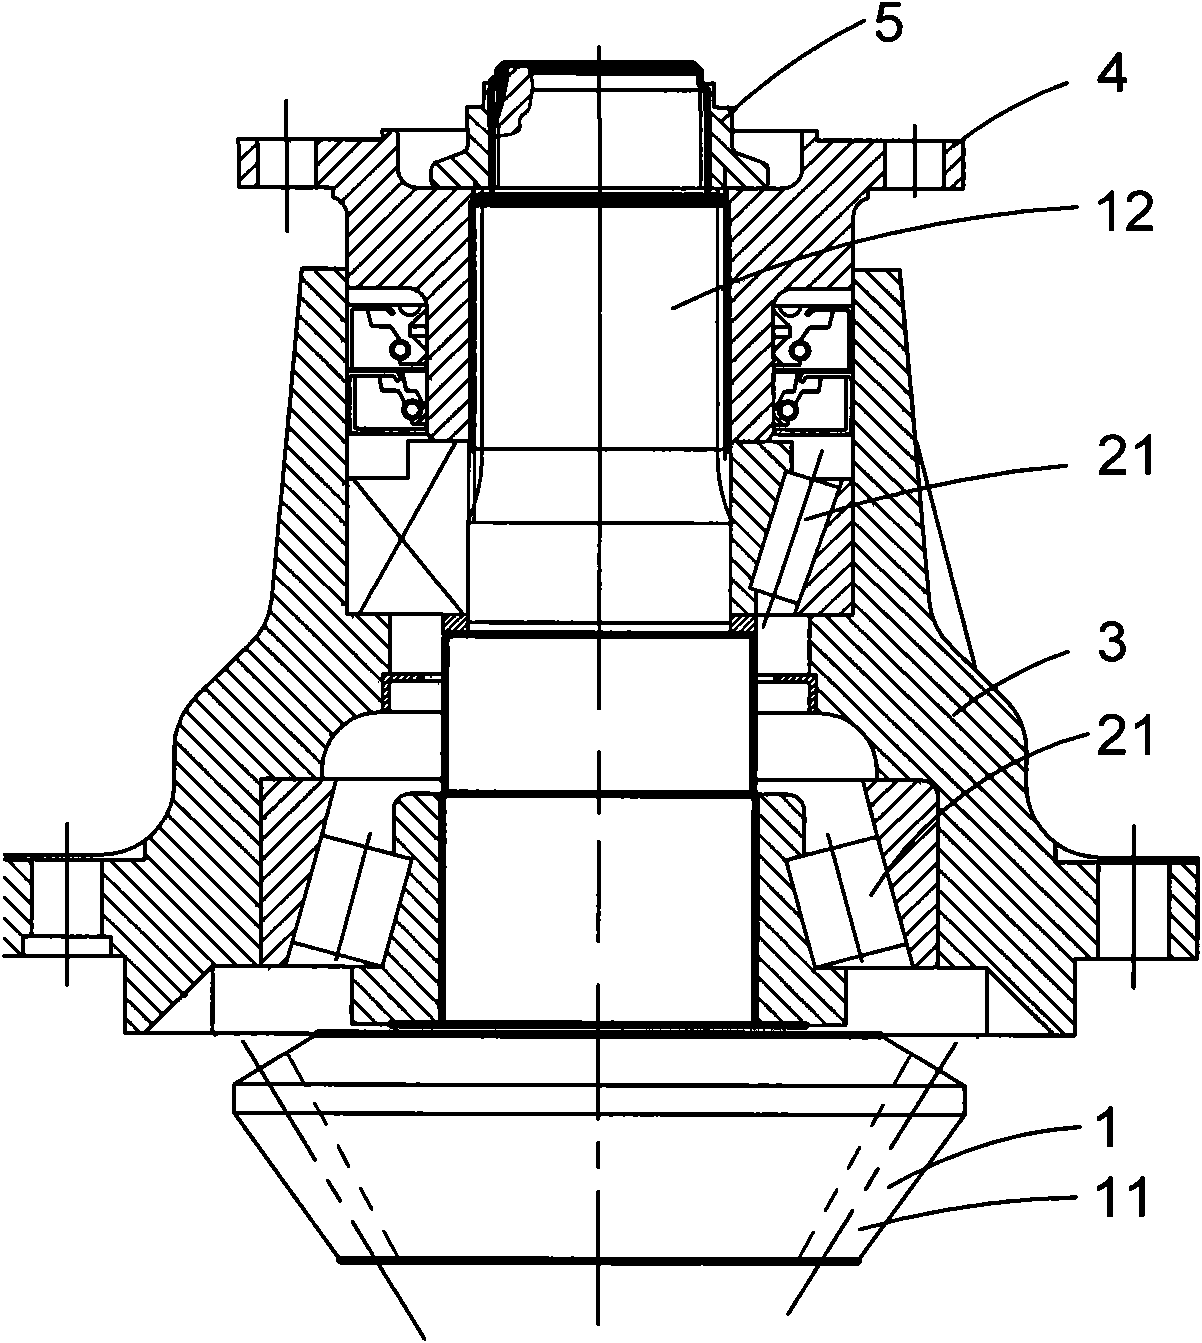 Adaptor device for synchronous butt joint of main cone nut and flange of automobile drive axle assembly